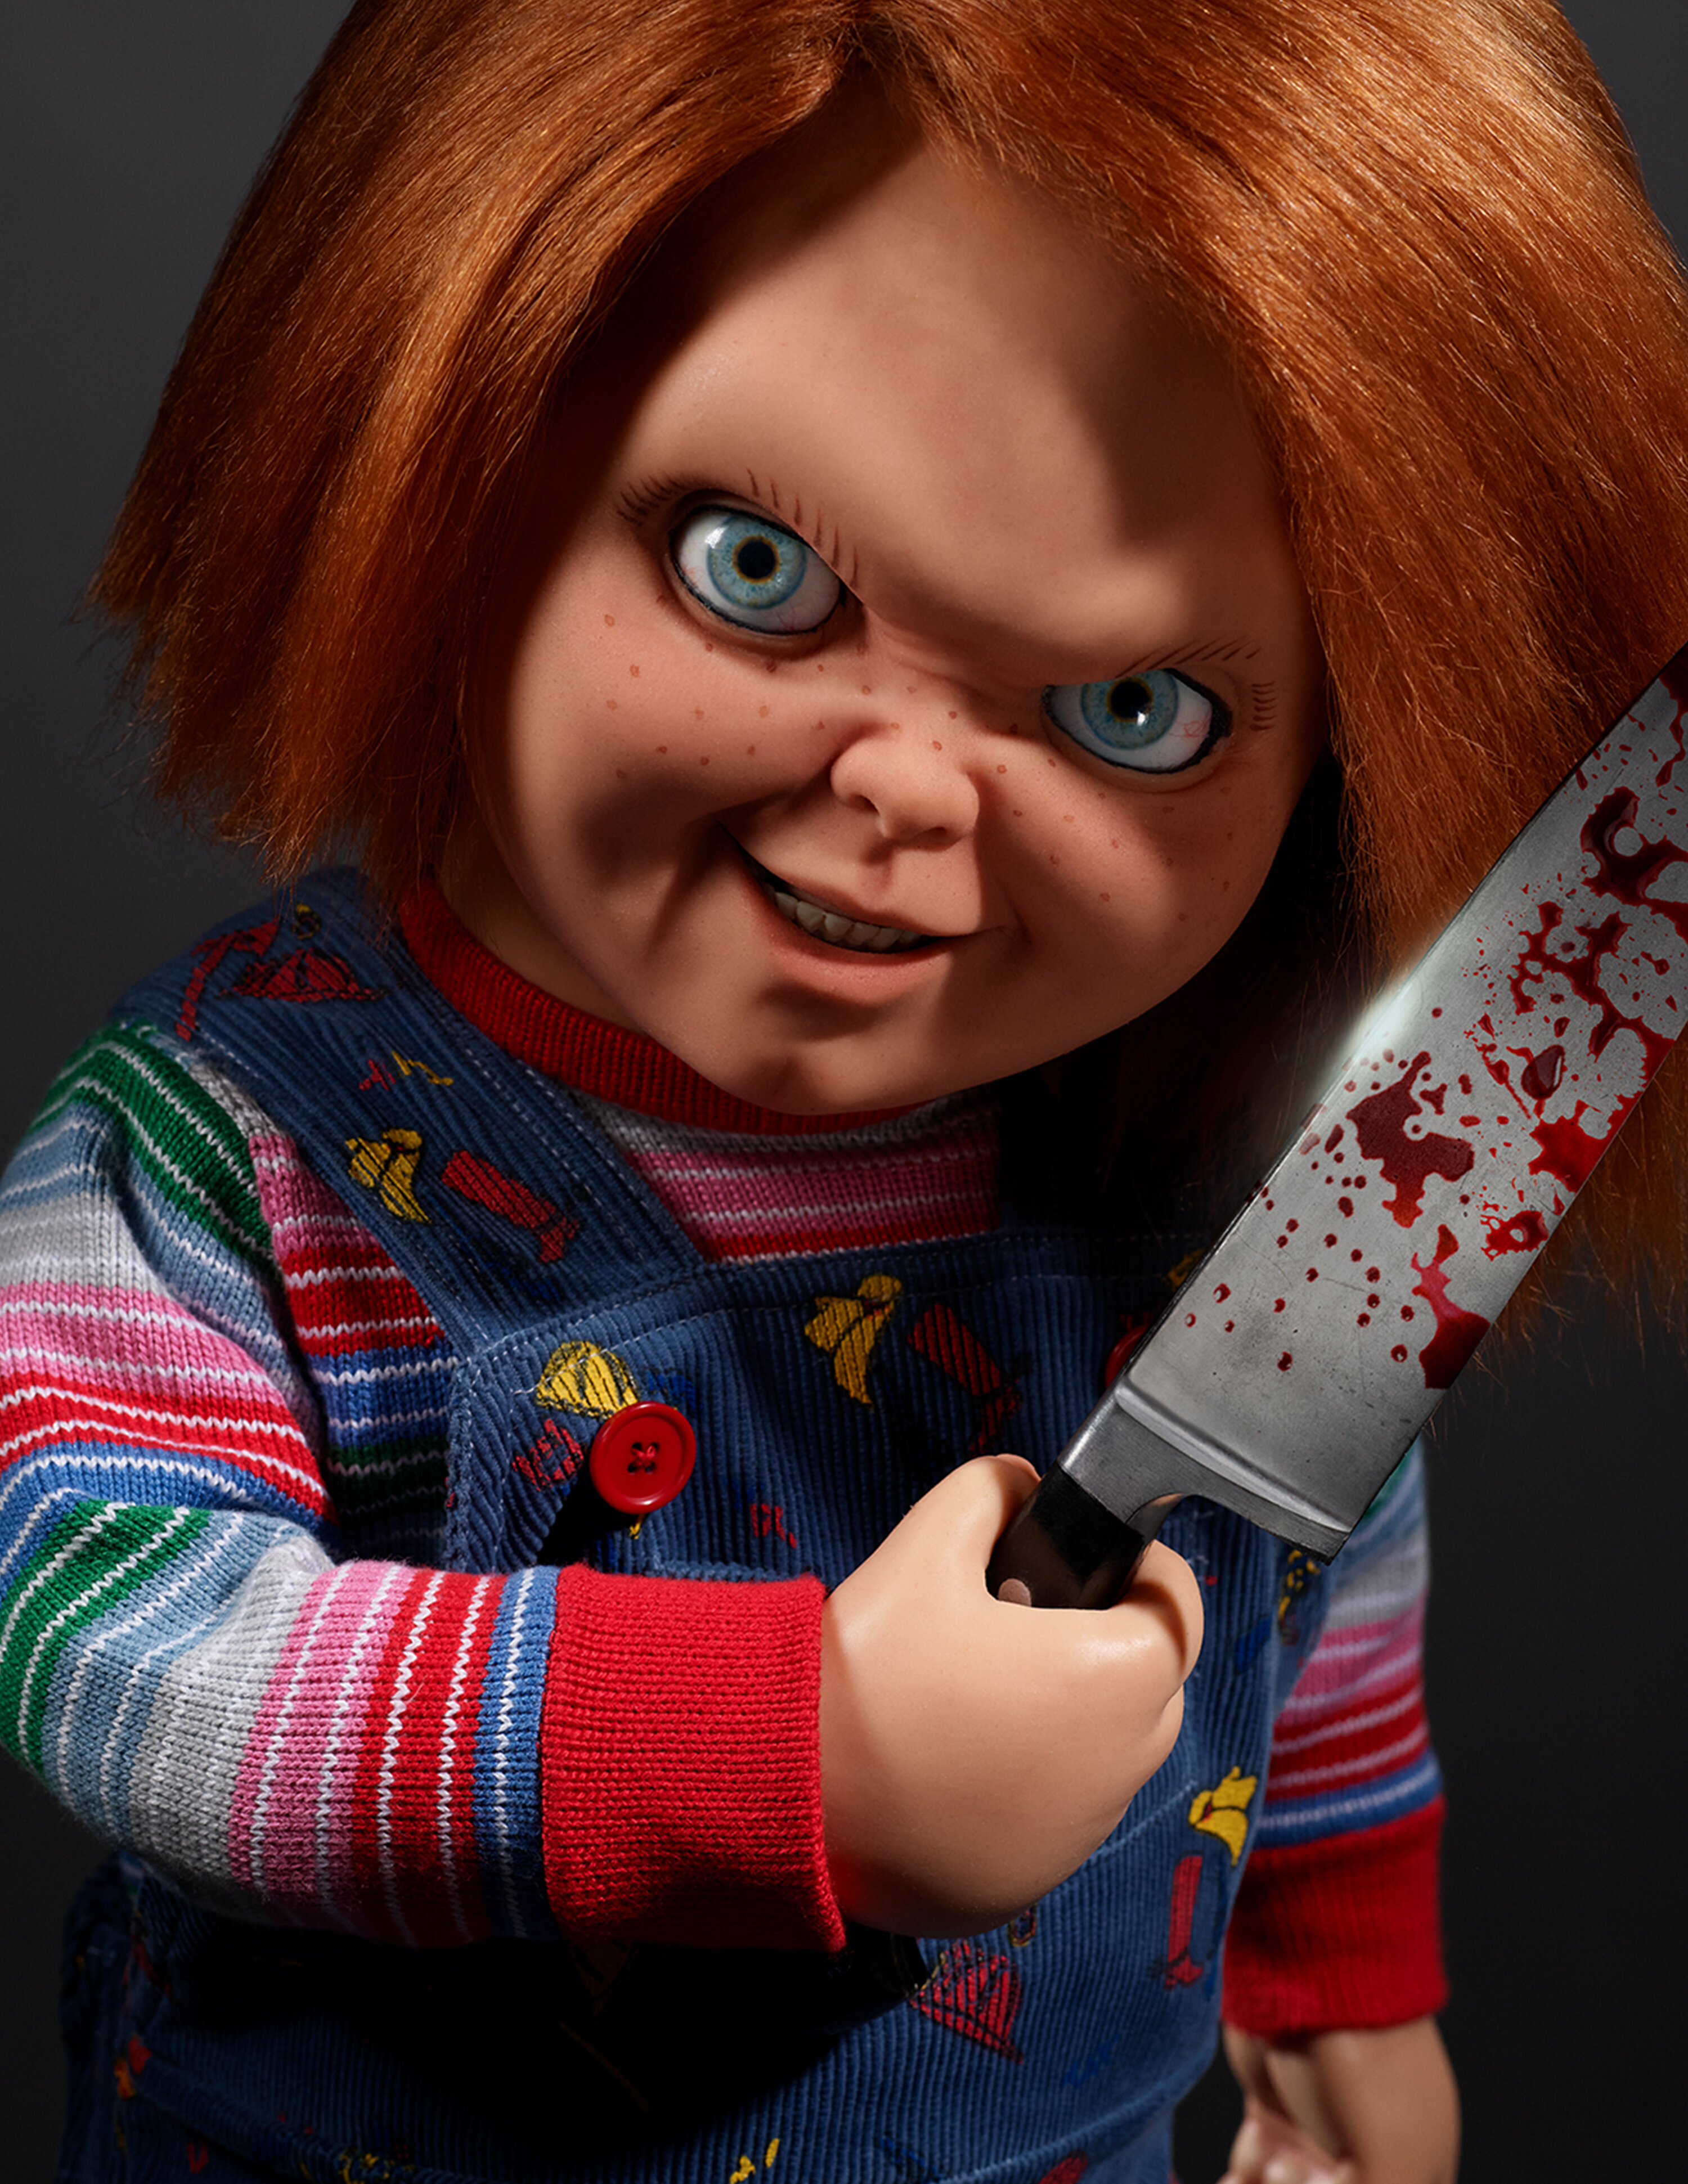 Neighbors Freaked By Creepy Chucky Doll Discover Real-Life Childs Play HuffPost Weird News image image